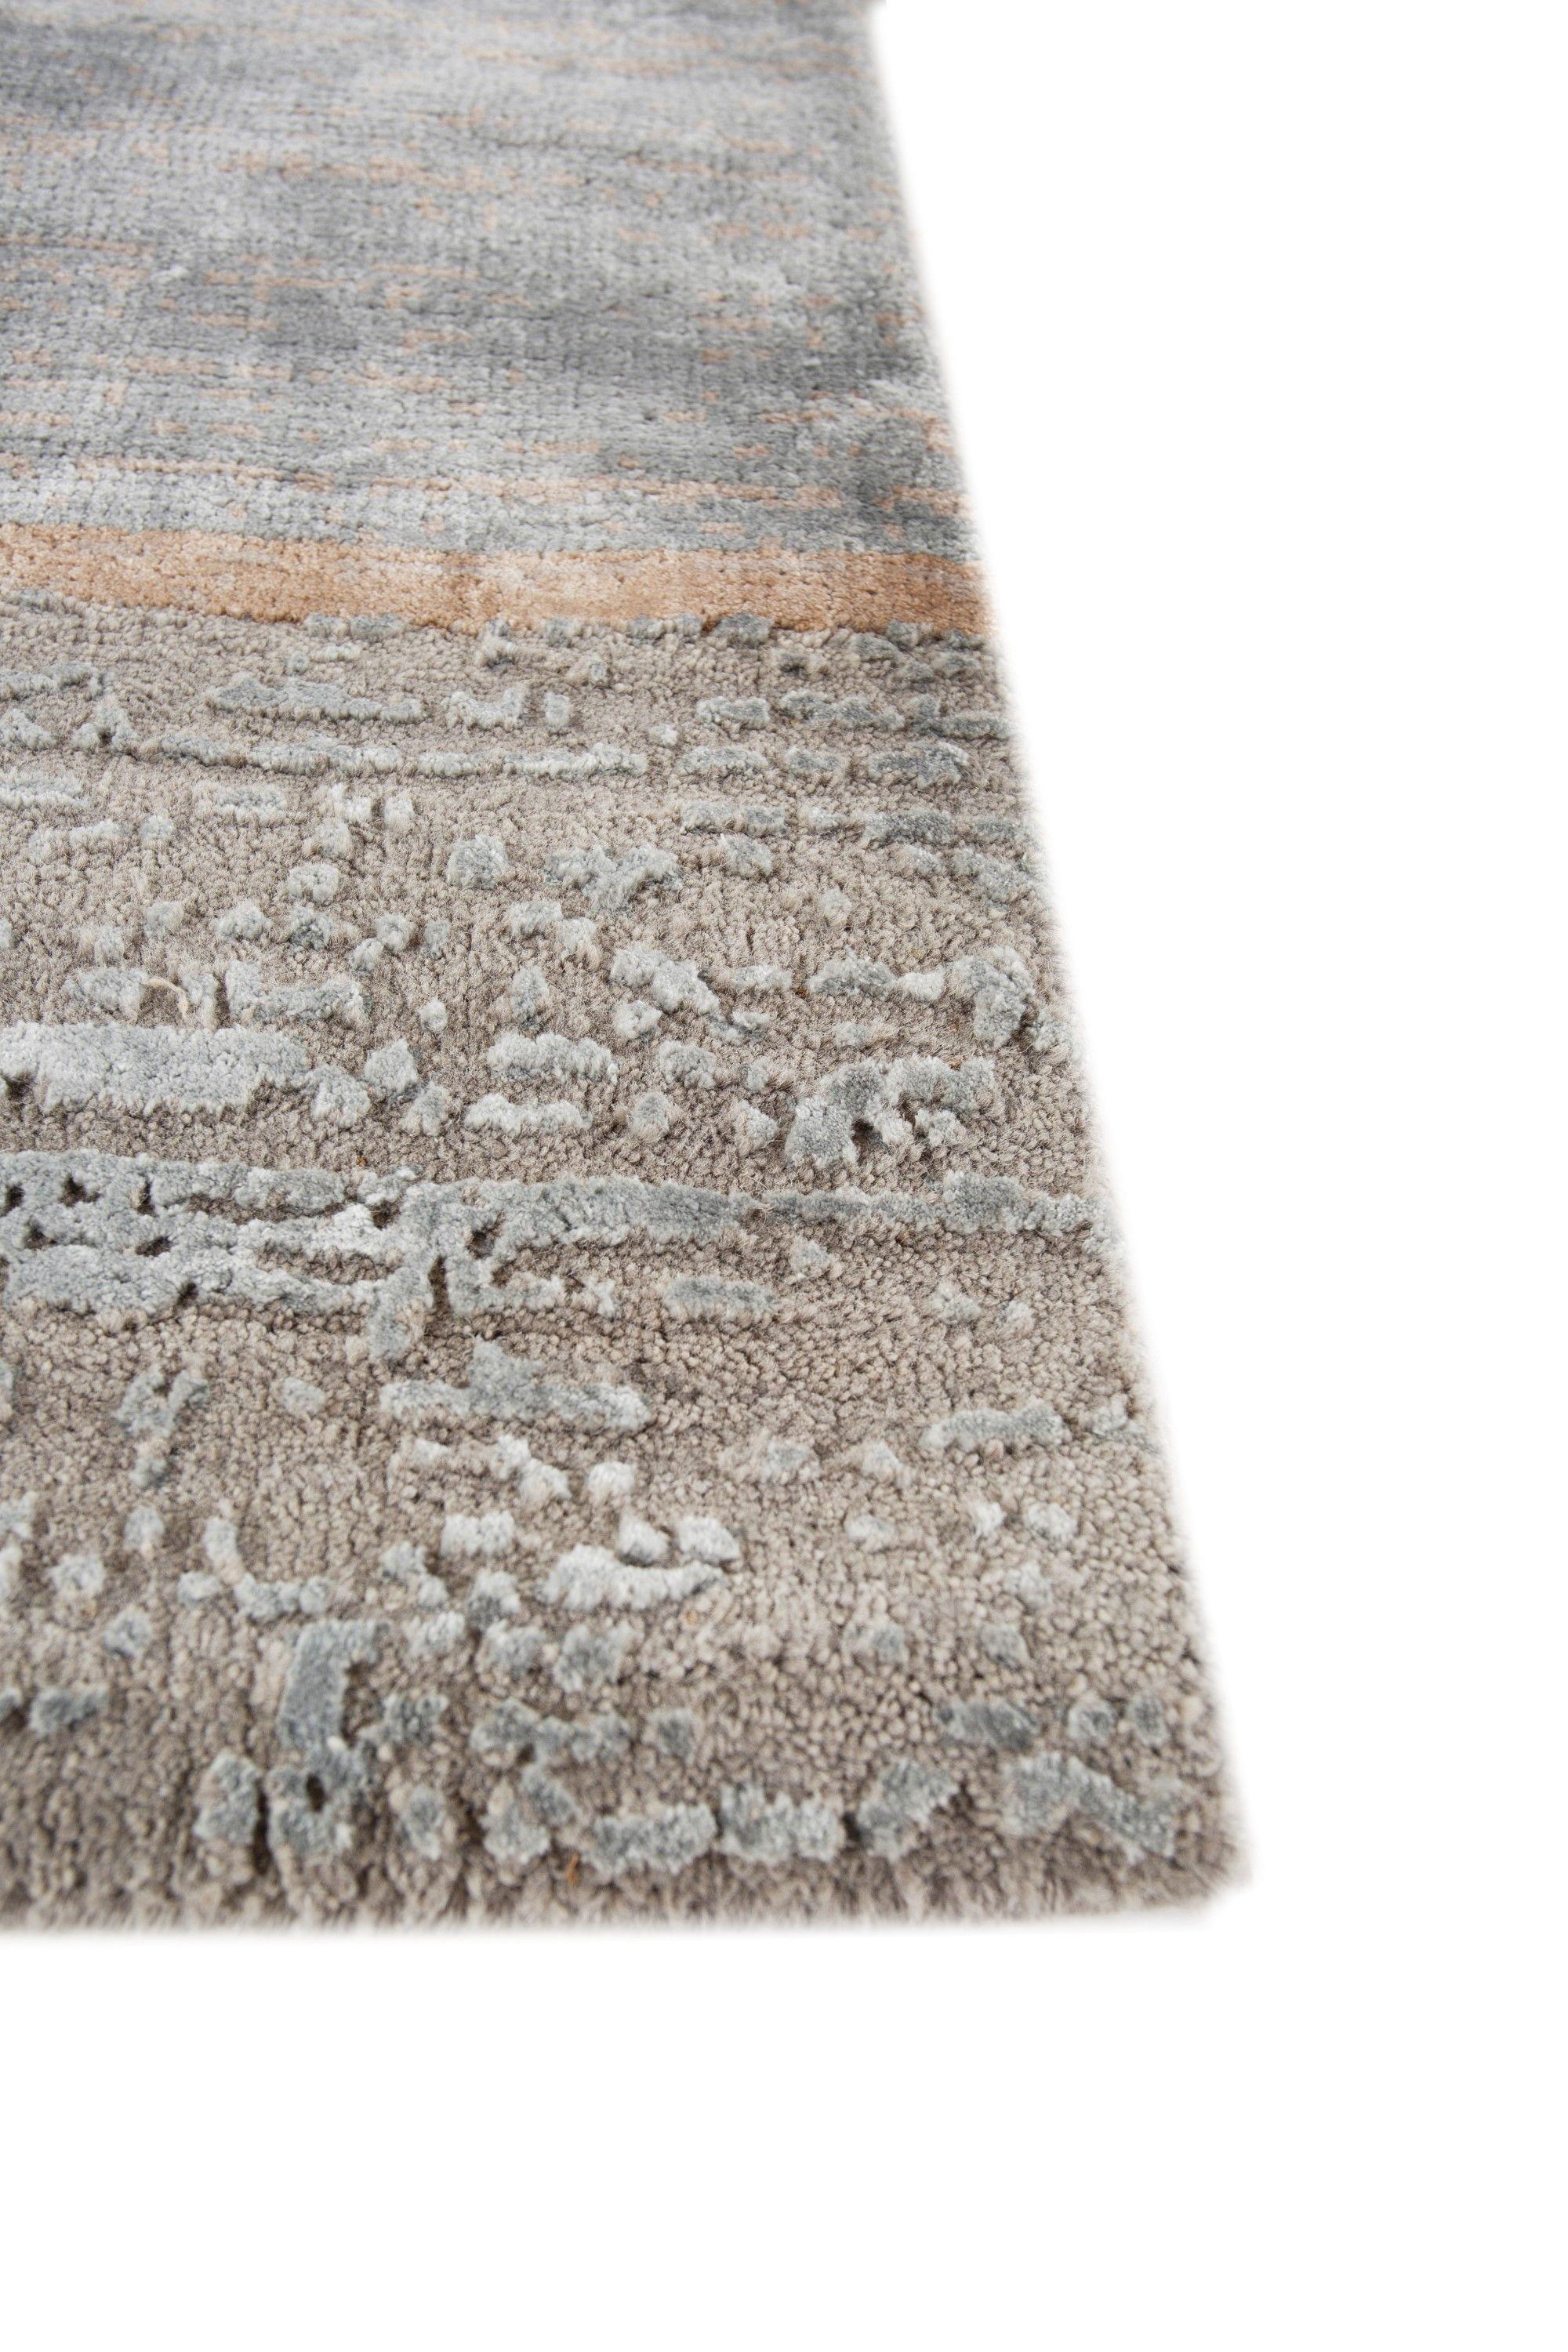 A tribute to ancient cultural beliefs from around the world. Our exquisite piece features complex designs meticulously crafted using basic geometry, resulting in elaborate and stimulating patterns. A masterpiece of transitional style, this rug is